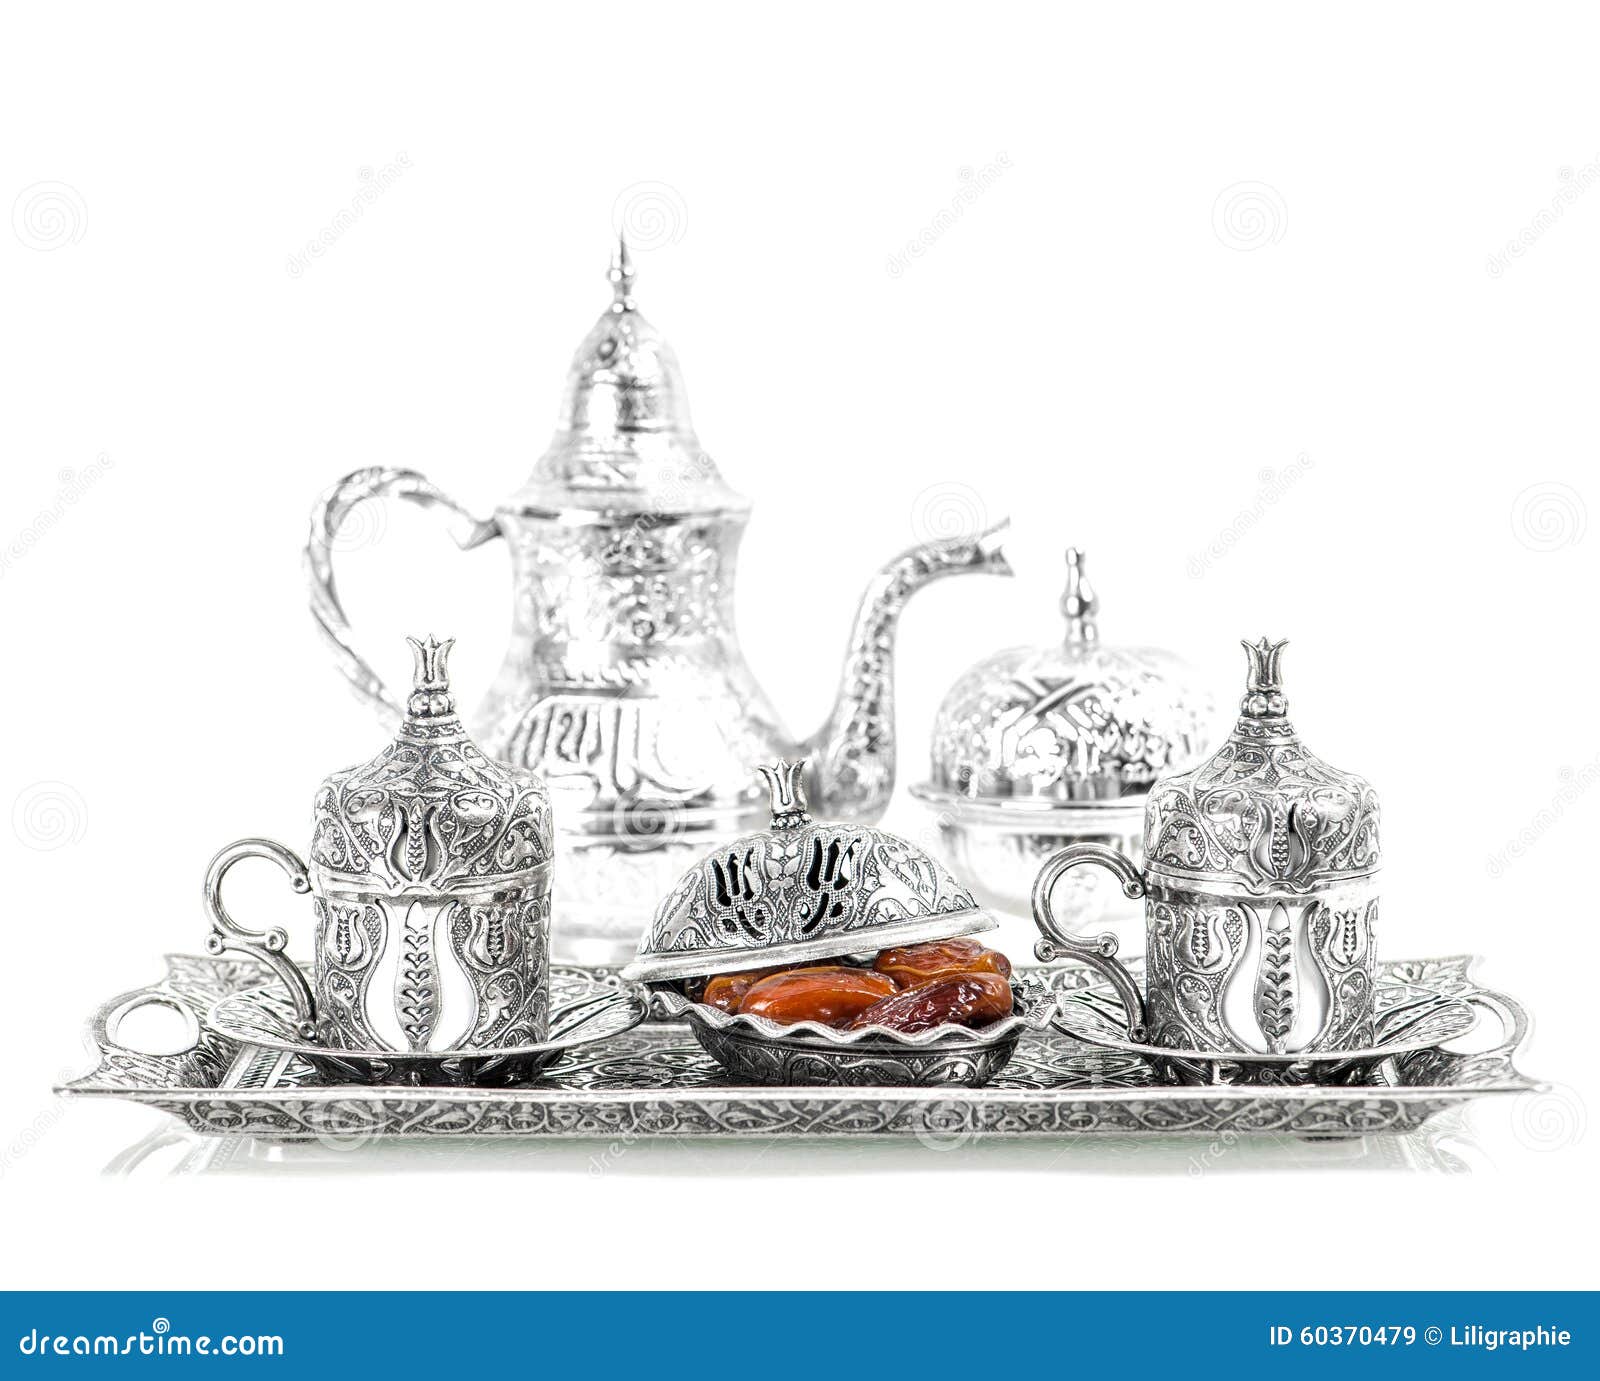 table setting with silver tableware. oriental hospitality